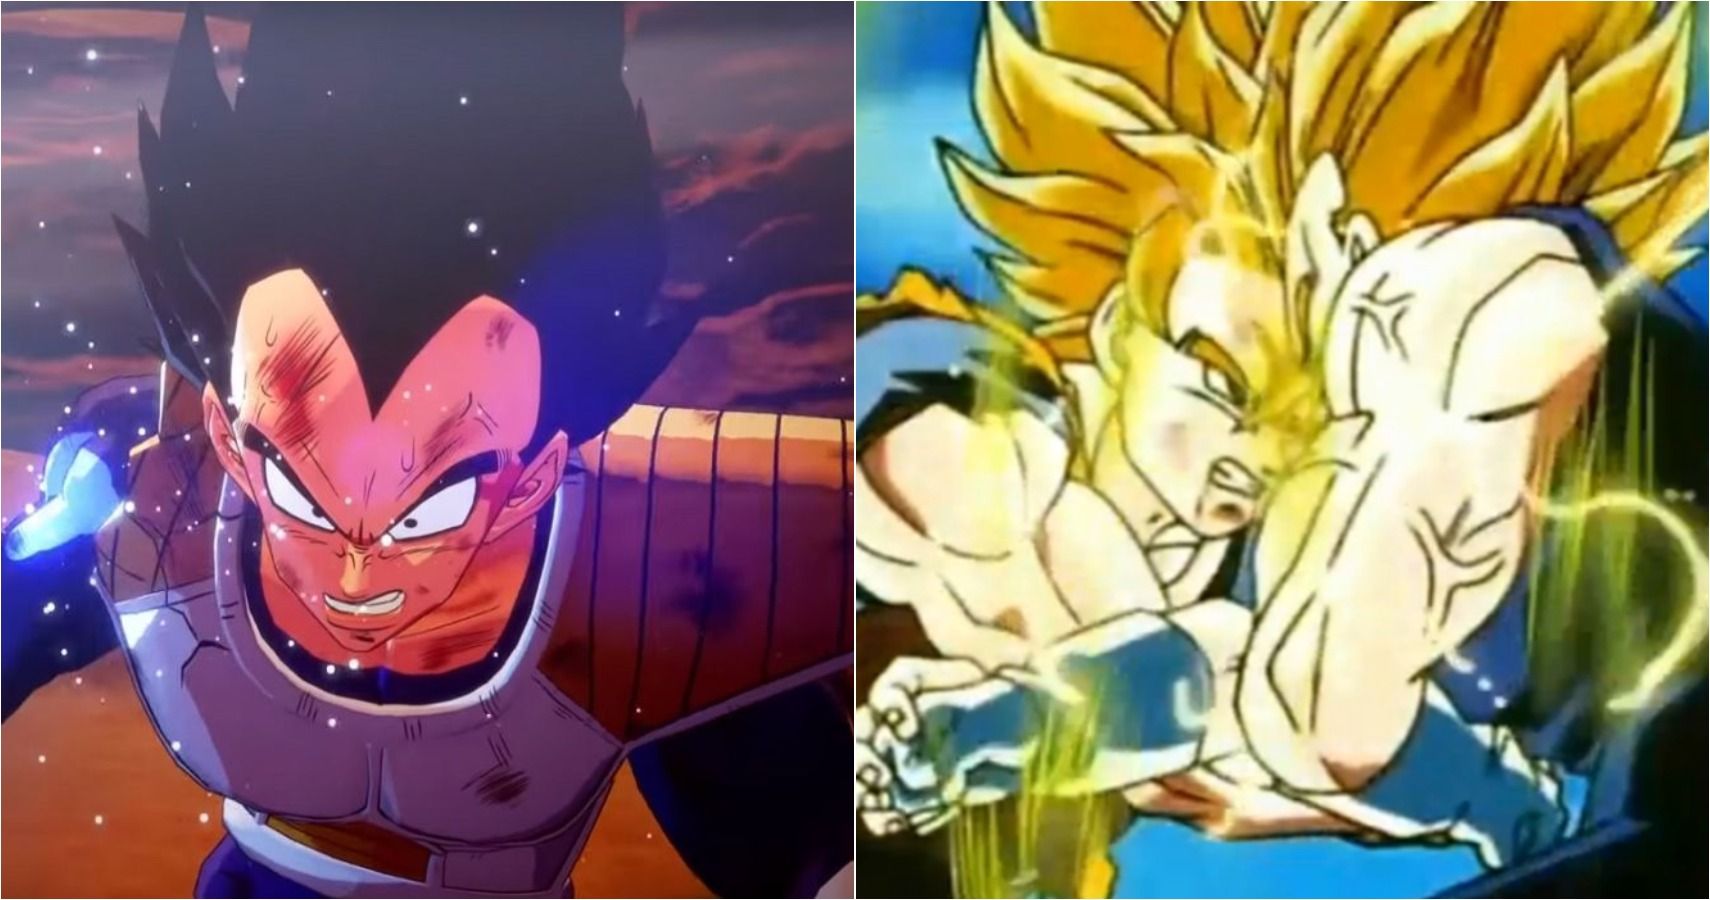 Dbz Kakarot 5 Things It Did Better Than The Anime 5 The Anime Did Better